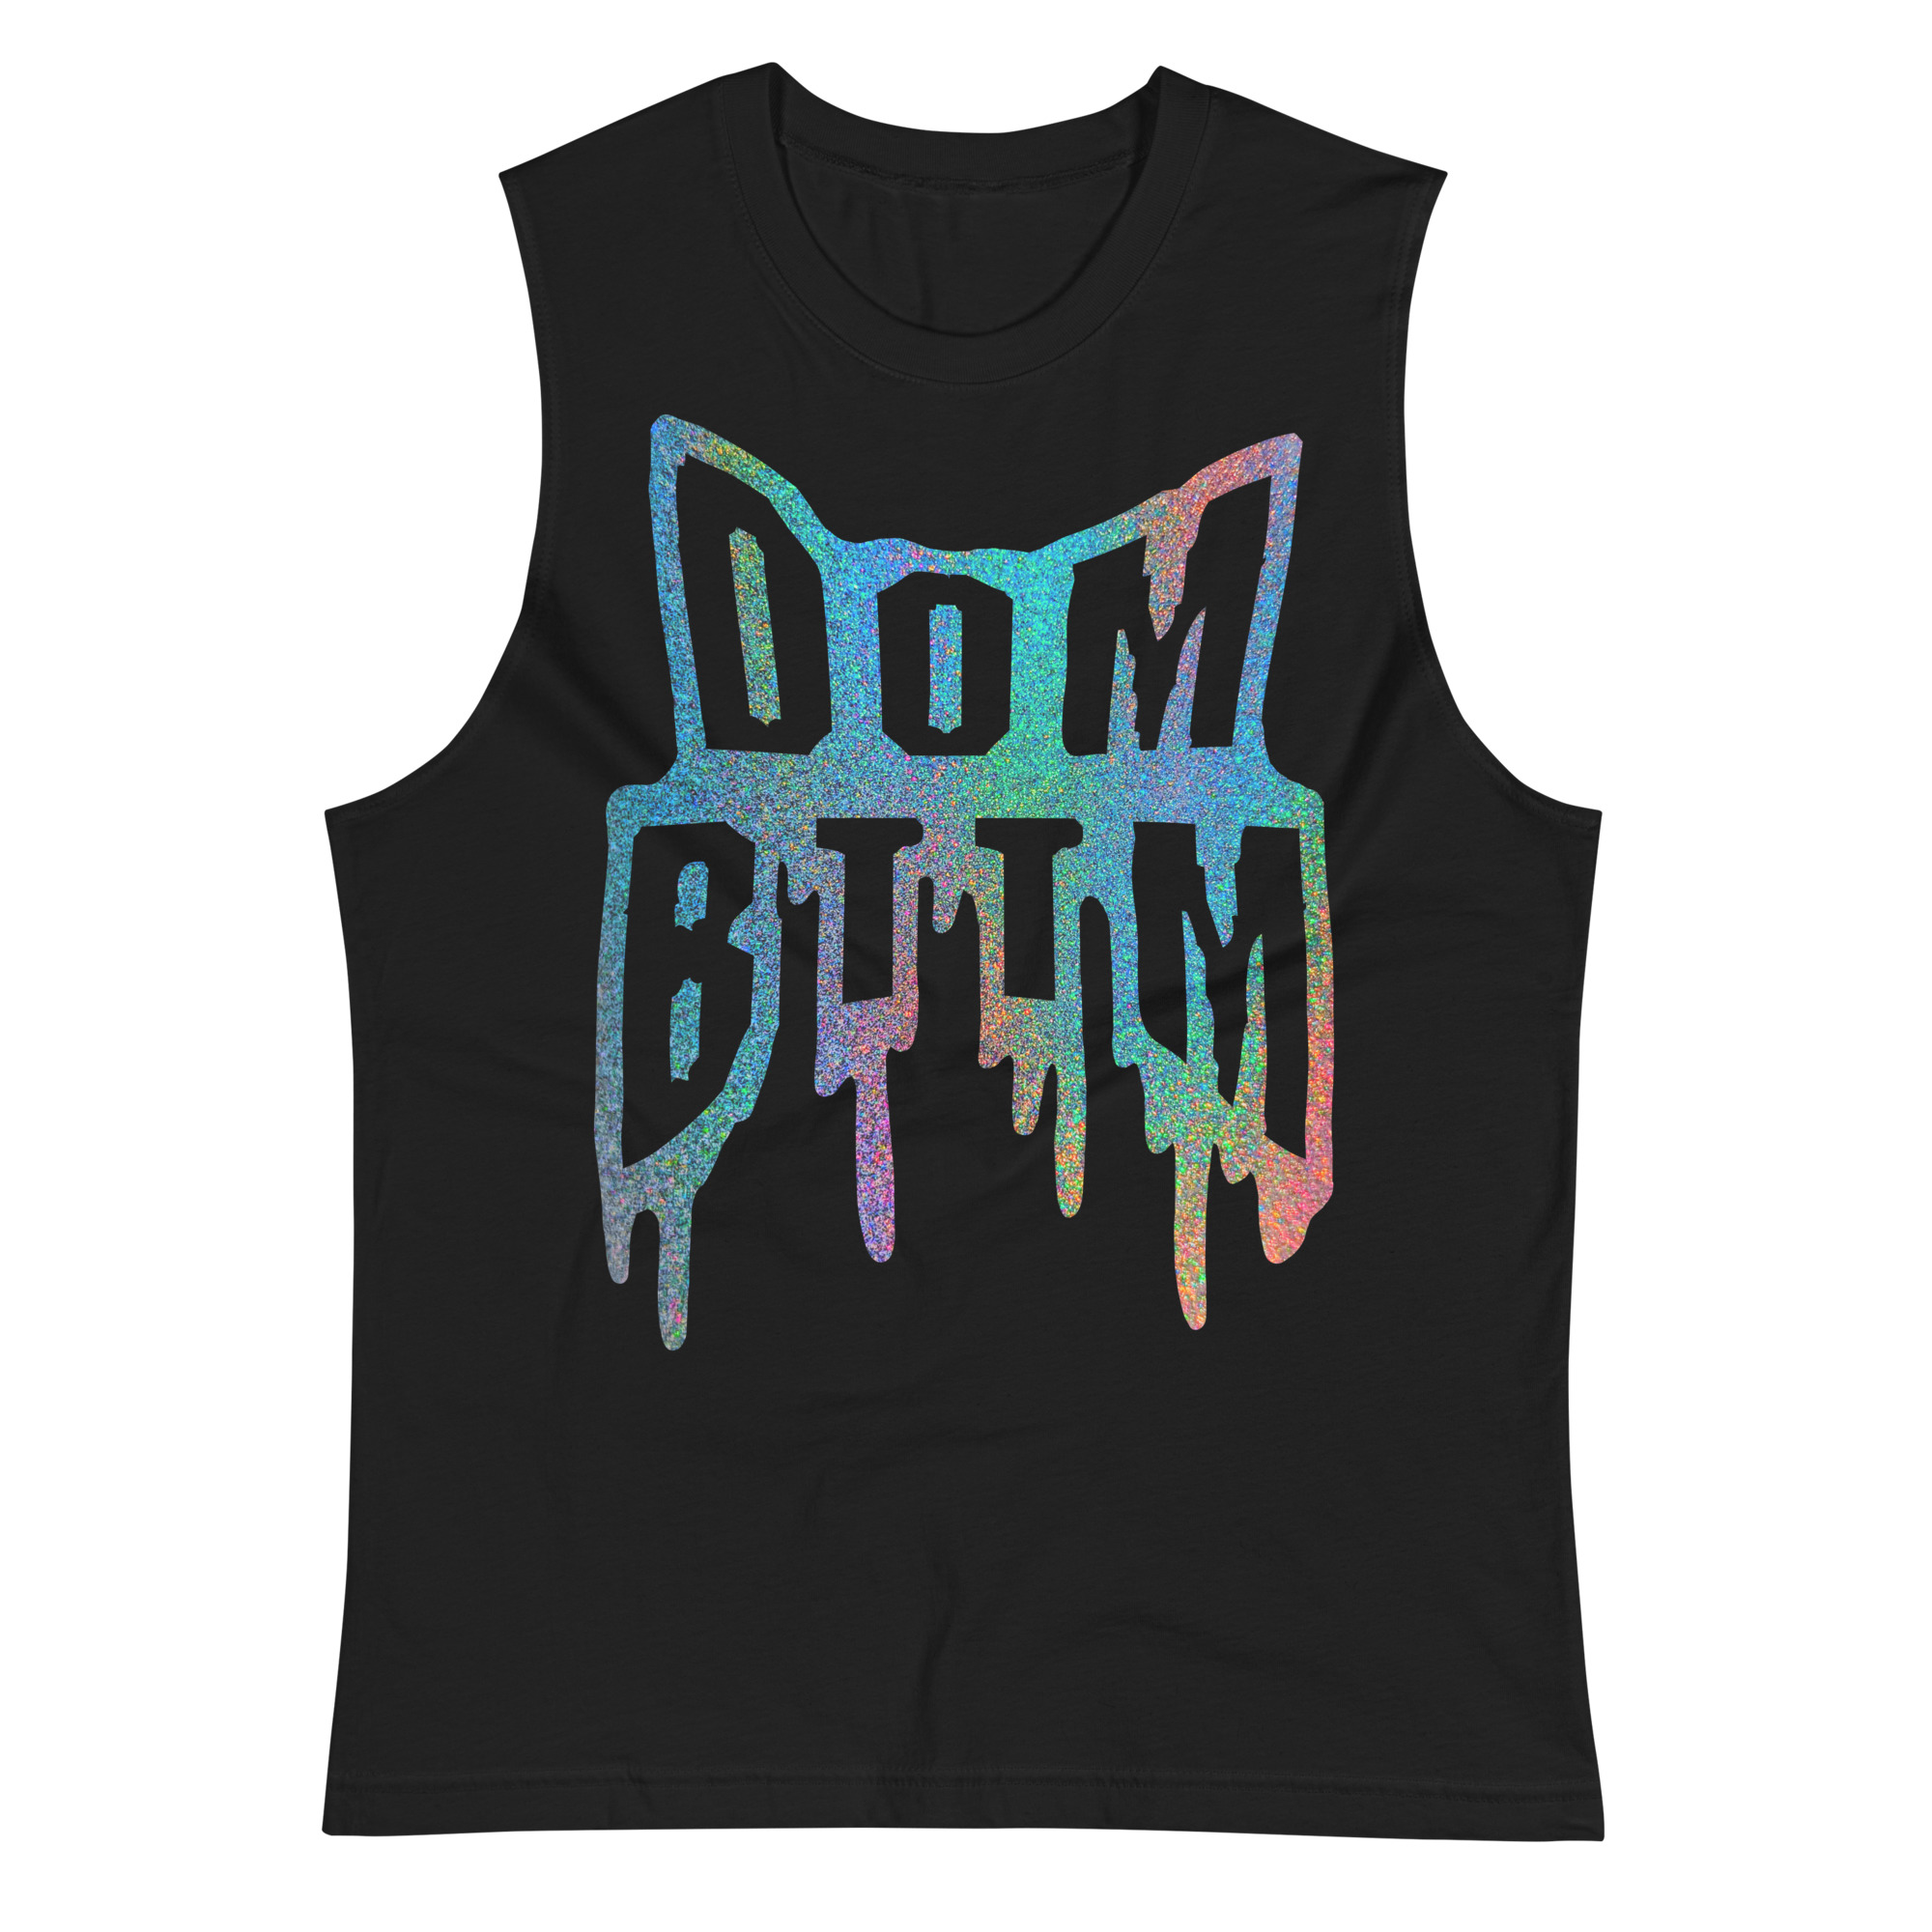 Featured image for “DOM BTTM - Muscle Shirt”